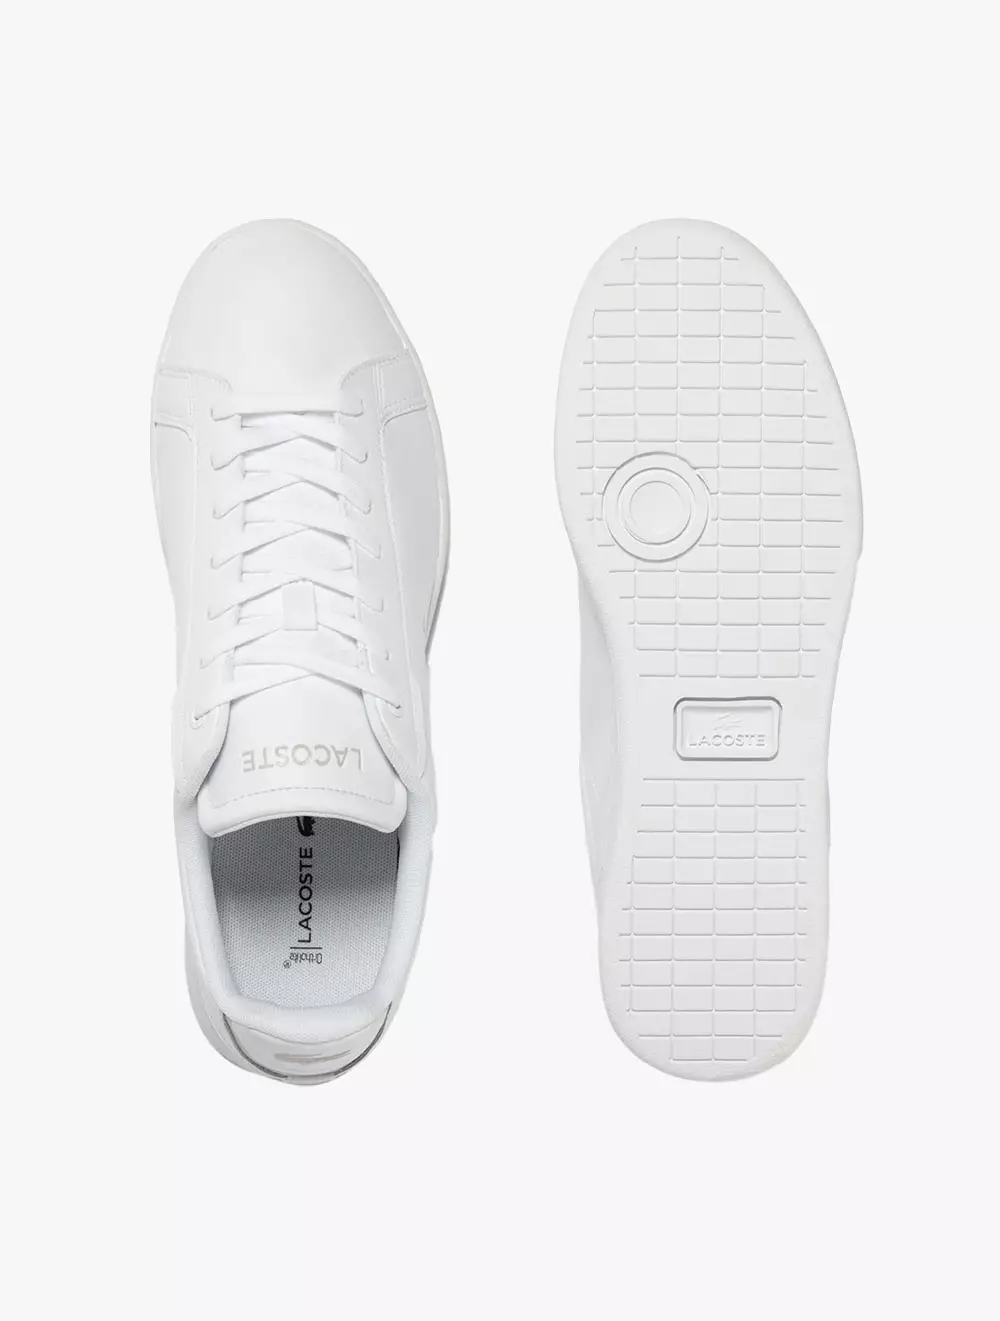 Jual Lacoste Men's Lacoste Carnaby Pro BL Leather Tonal Trainers ...